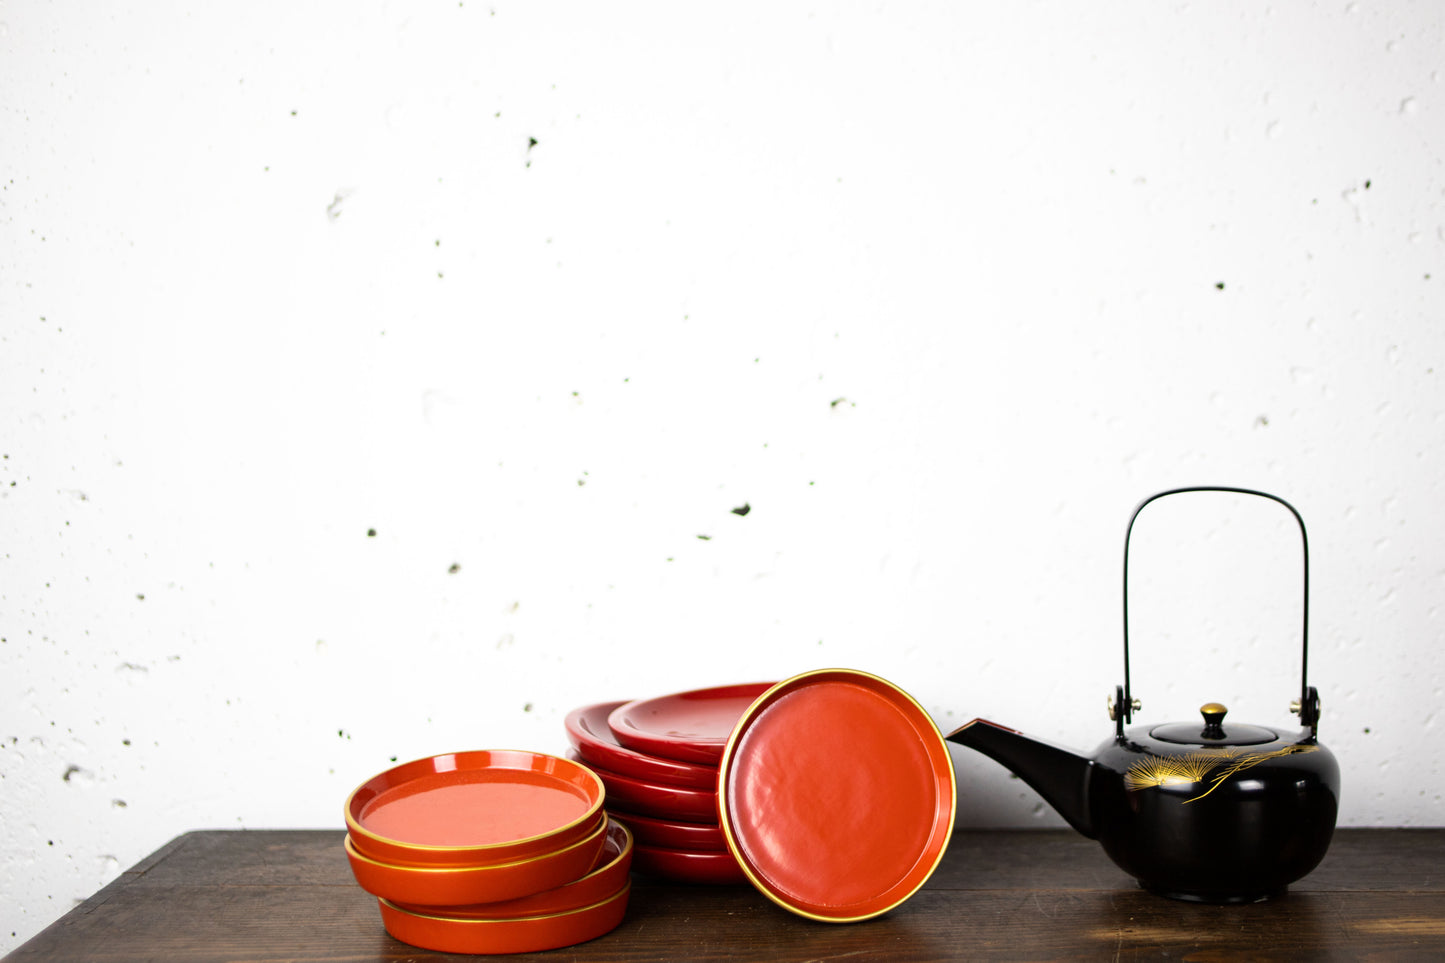 red lacquered dish